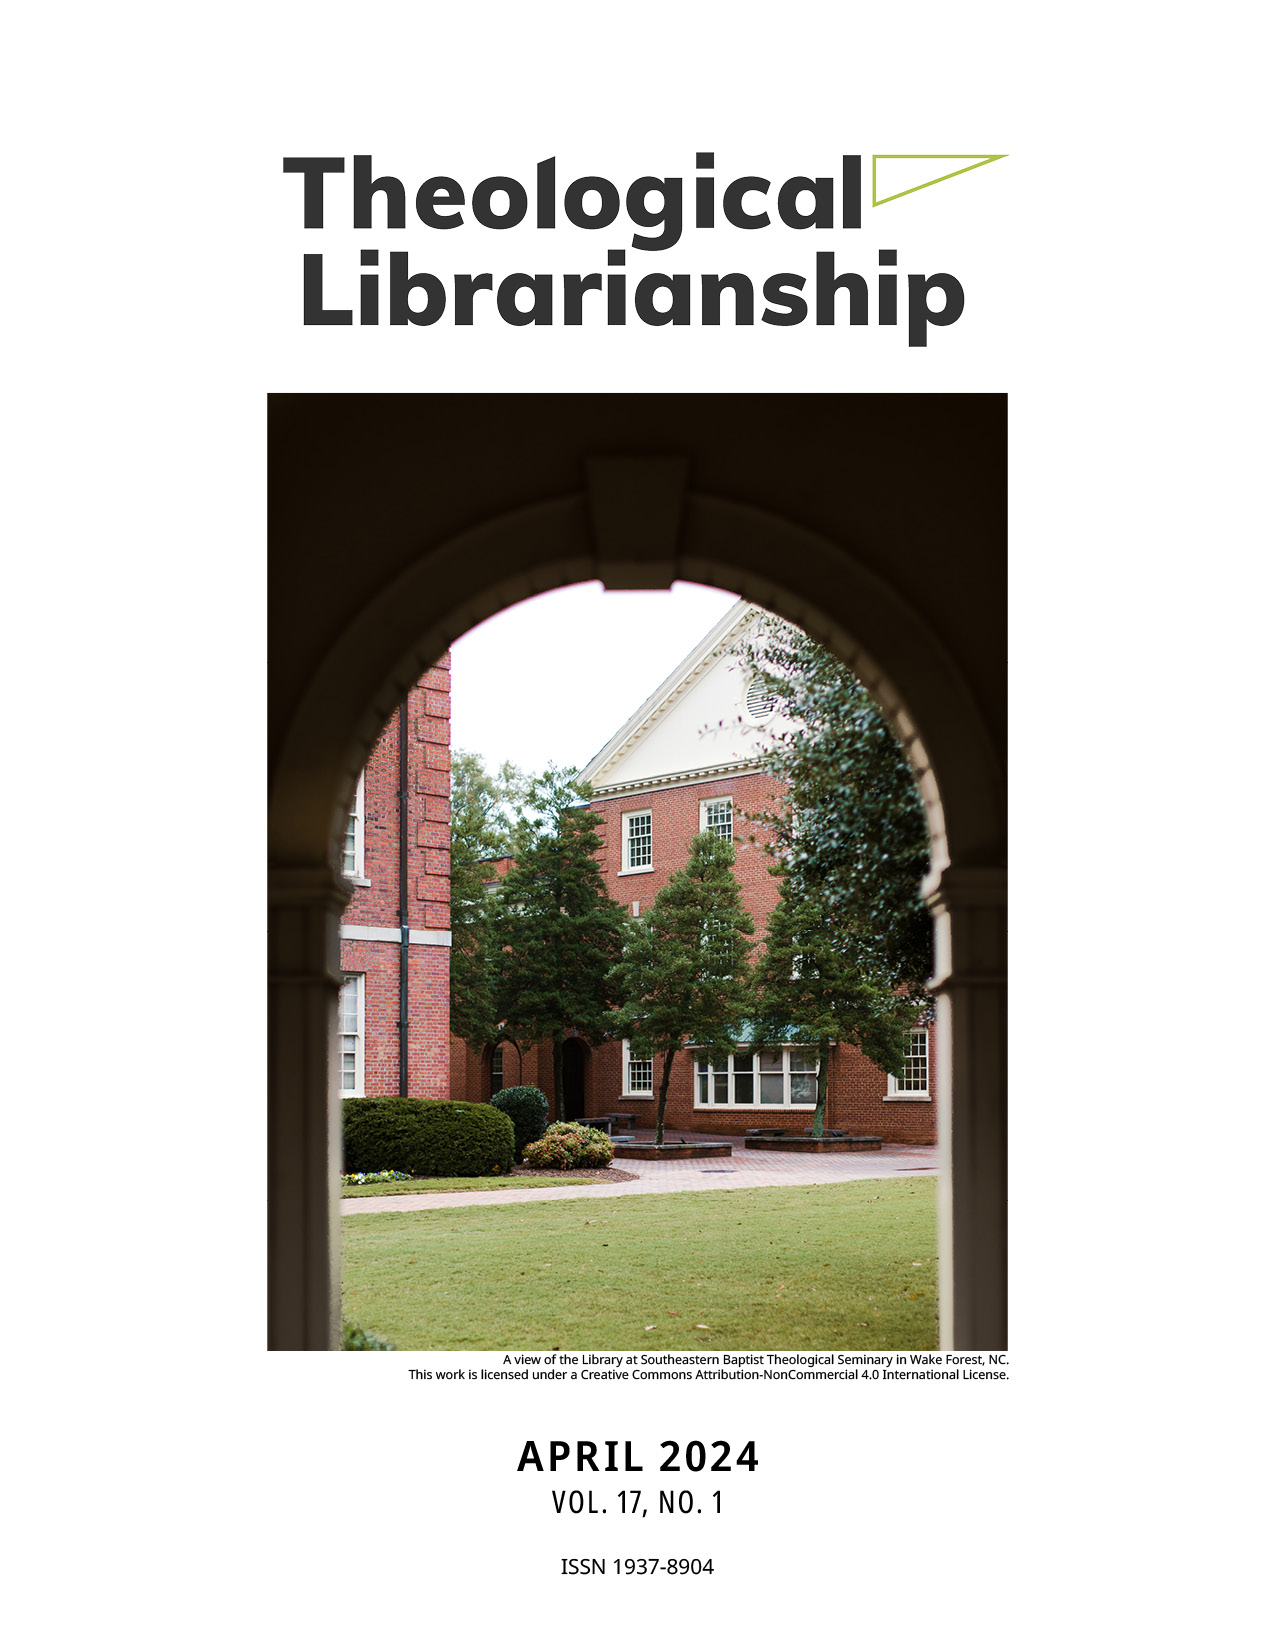 Theological Librarianship cover. Looking through a silhouetted archway to a grass covered courtyard with redbrick buildings around the ege.